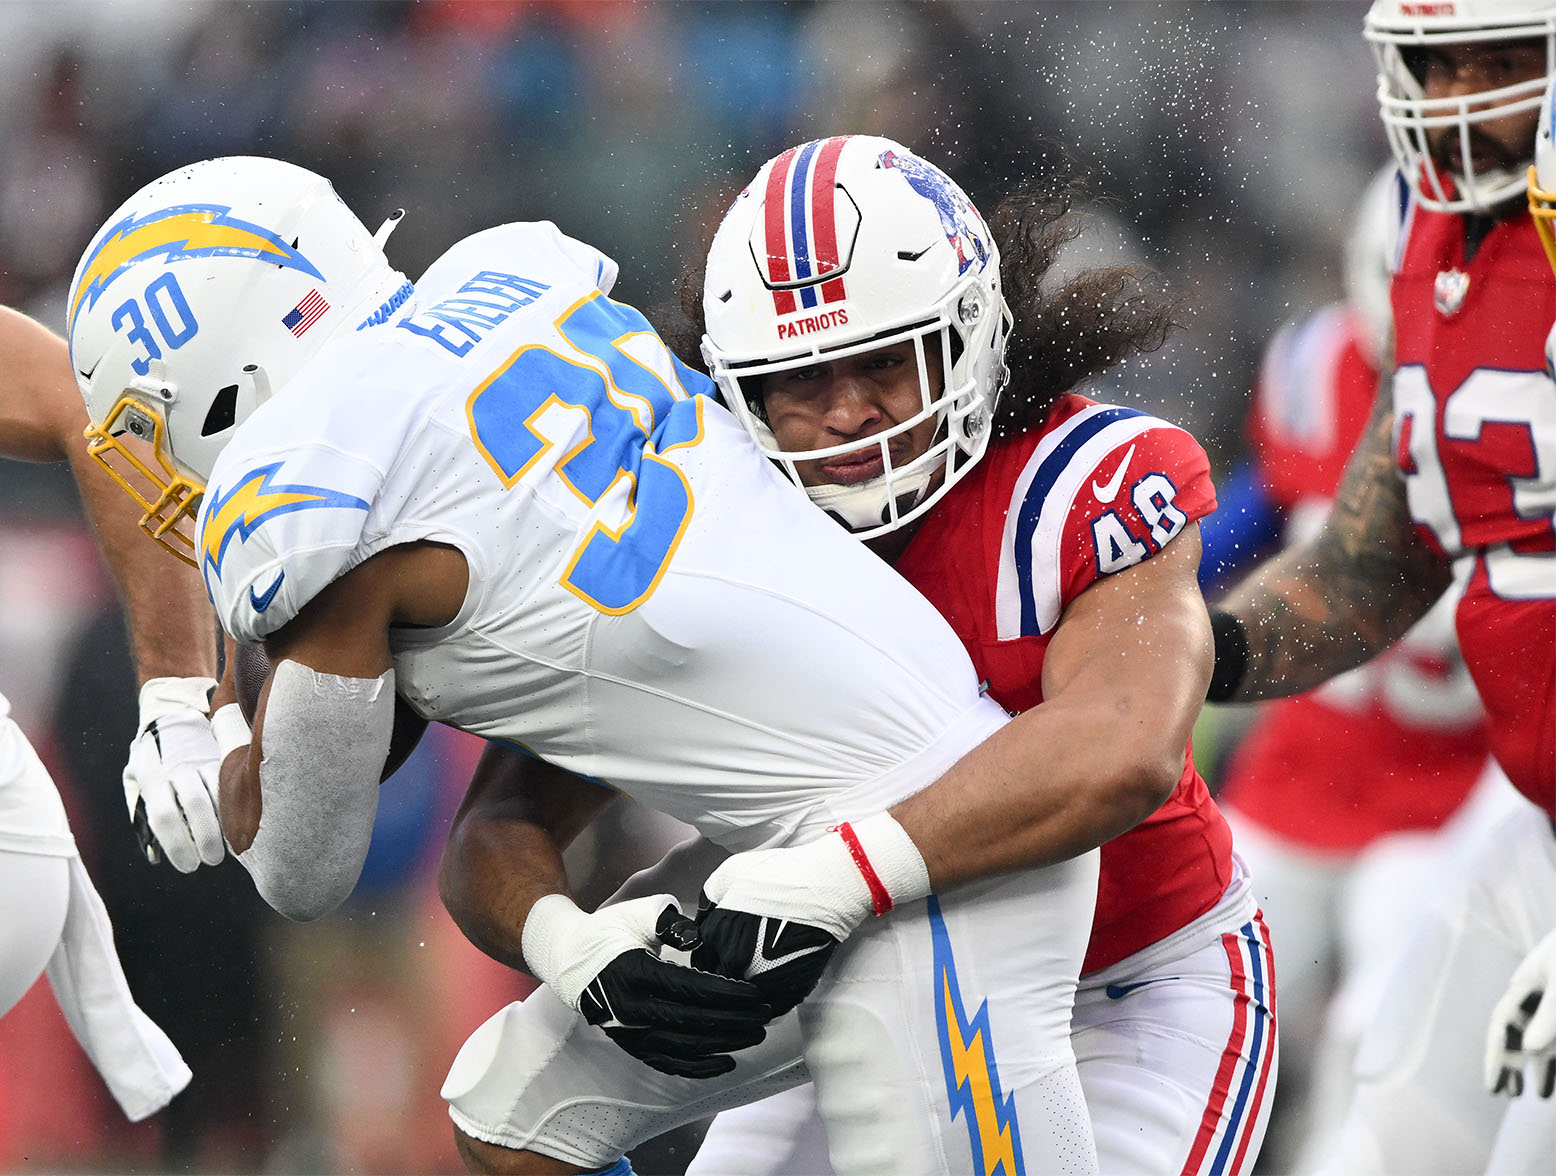 Dec 3, 2023; Foxborough, Massachusetts, USA; New England Patriots linebacker Jahlani Tavai (48) tackles Los Angeles Chargers running back Austin Ekeler (30) during the first half at Gillette Stadium. Mandatory Credit: Brian Fluharty-USA TODAY Sports